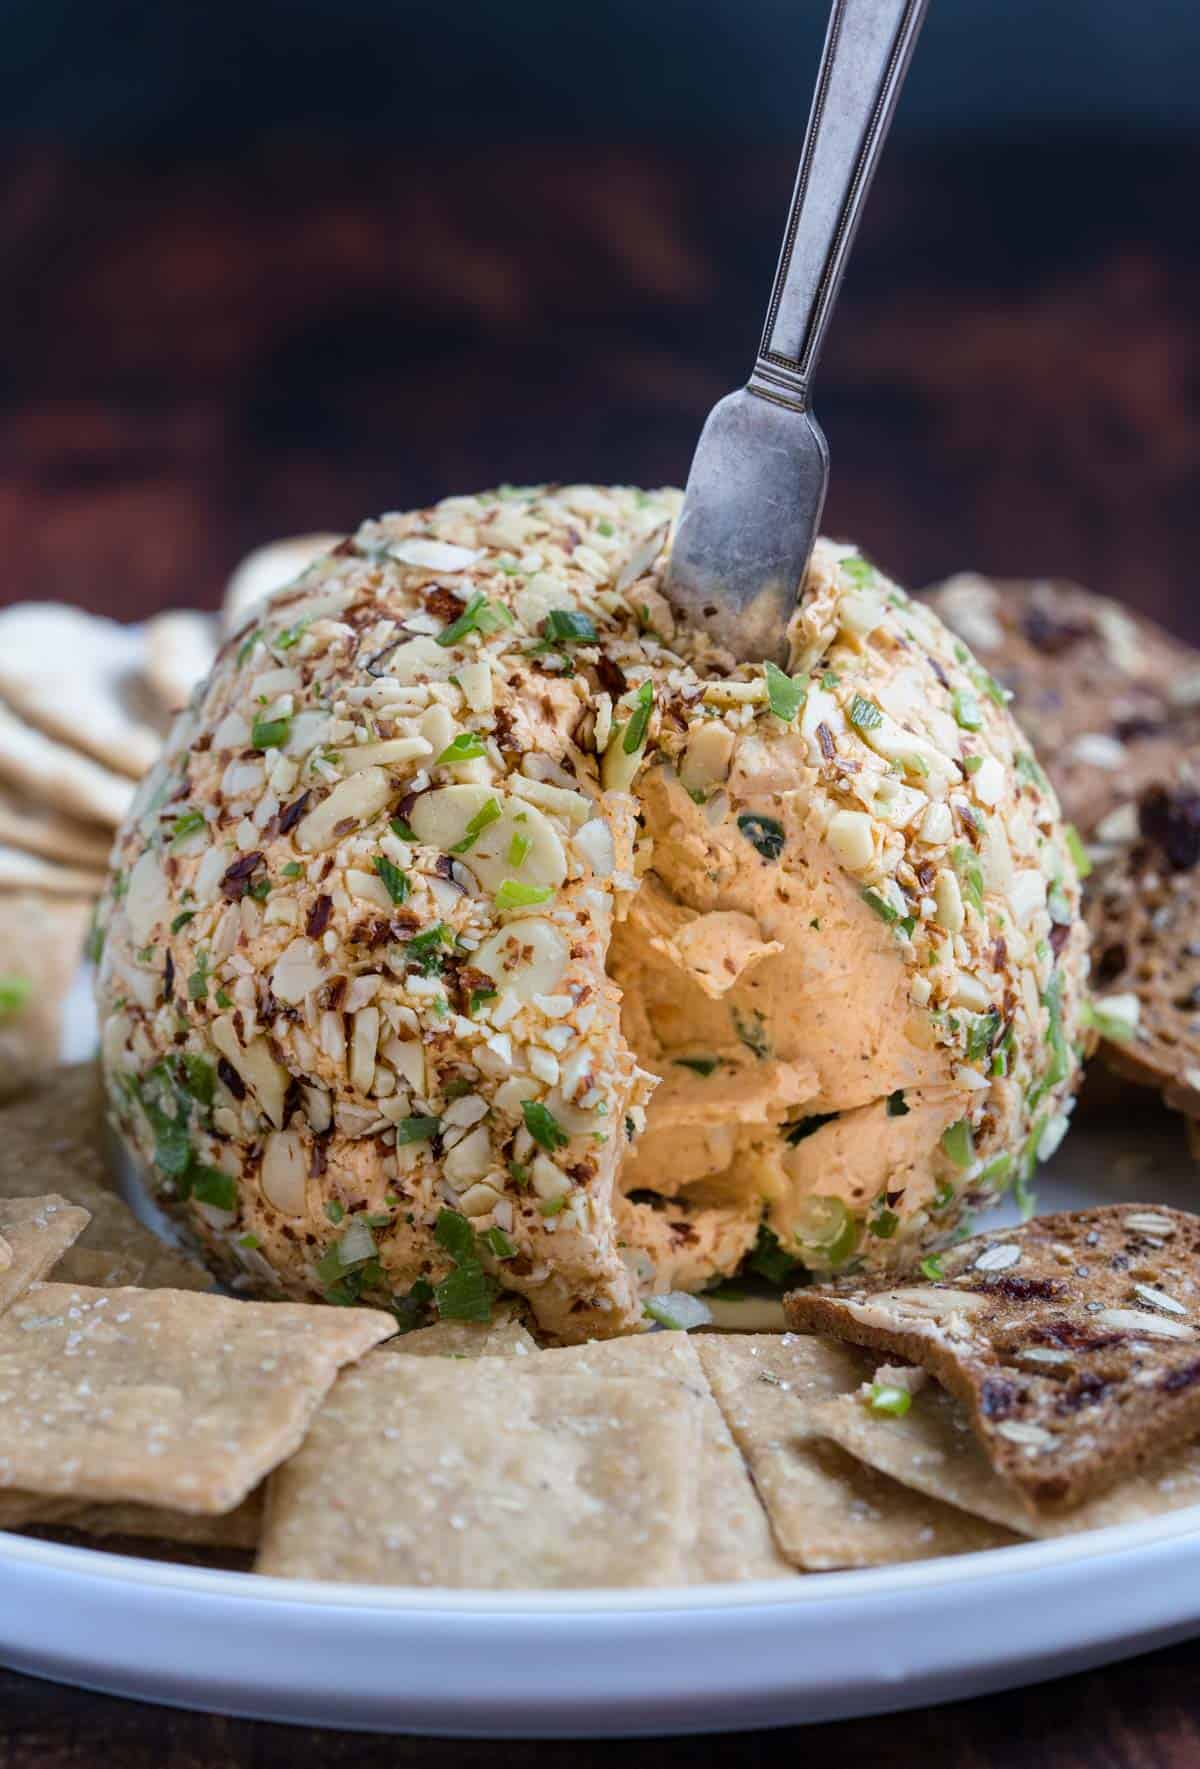 Smoked Cheese Ball with smoked almonds